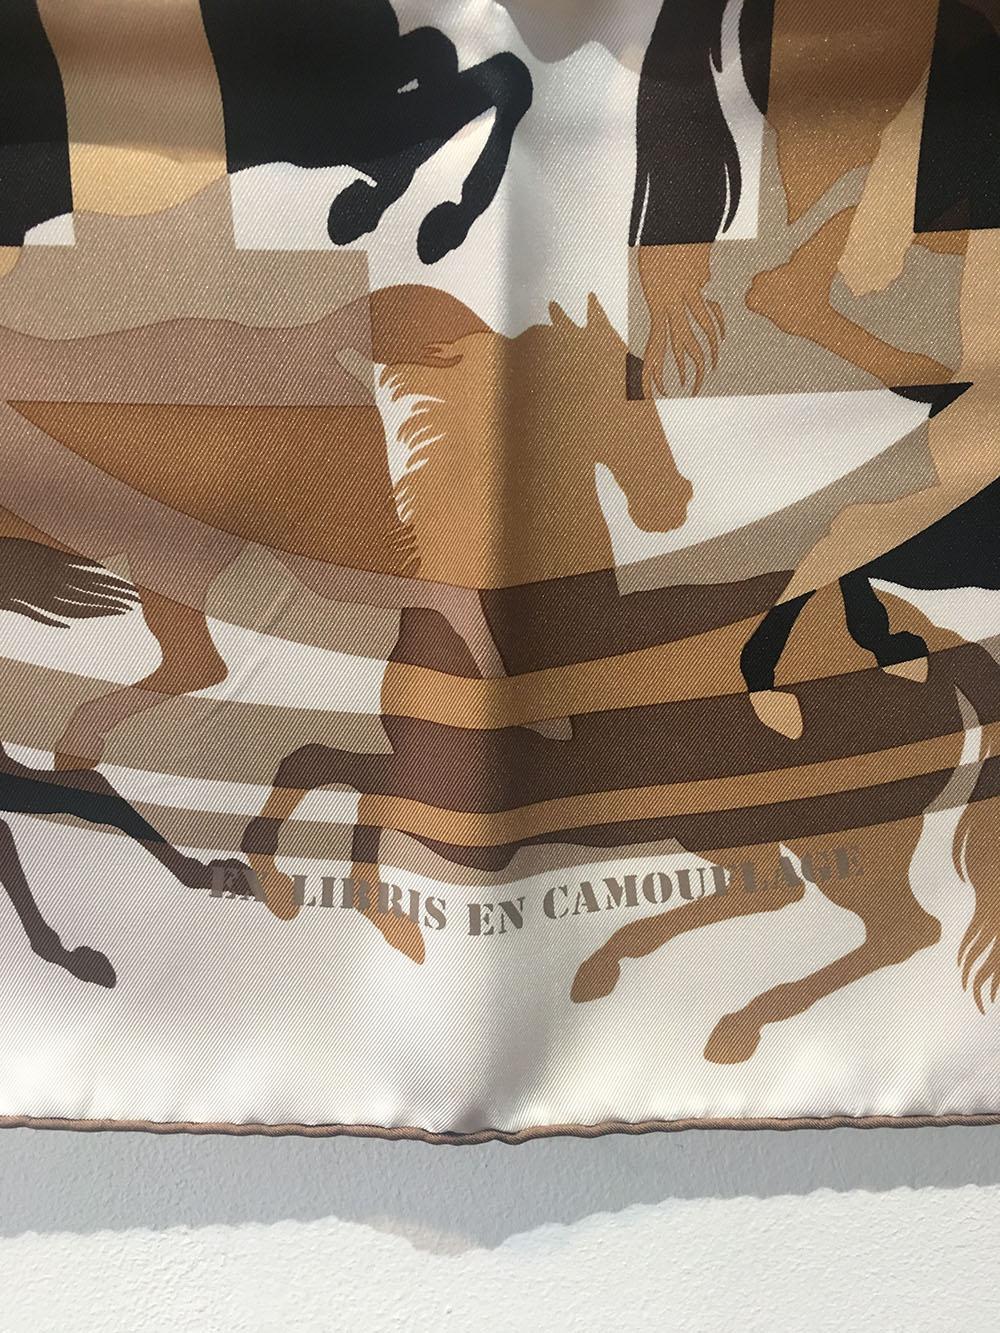 TIMELESS Hermes Ex Libirs en Camouflage silk scarf in excellent condition. Original silk screen design c2010 by Benoit Pierre Emery features a unique camouflage style print with running horses in tans, black, and browns over an ivory background, a